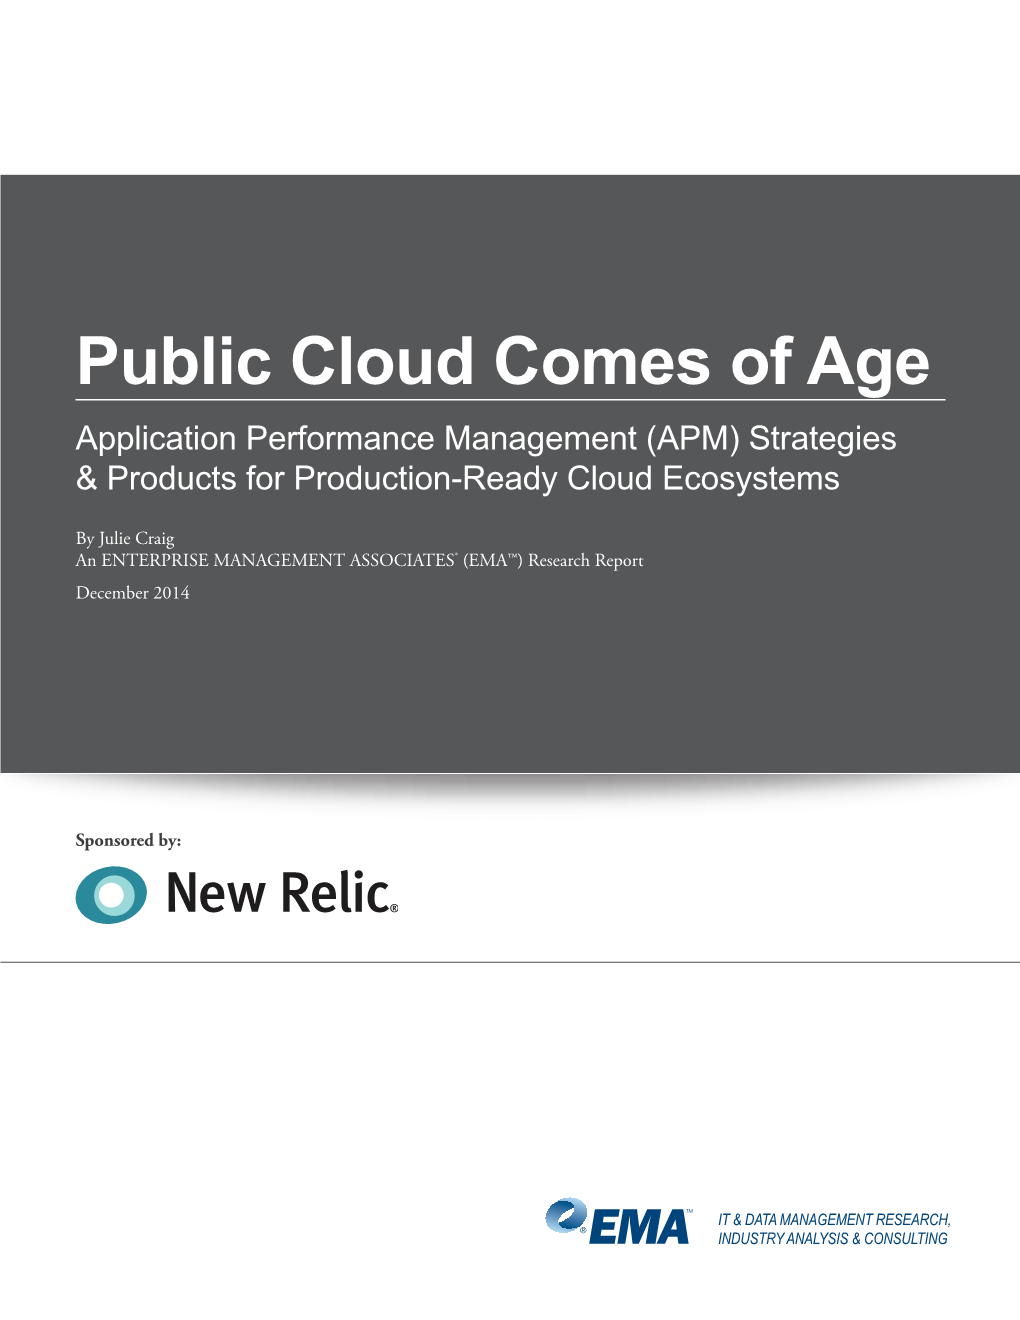 Public Cloud Comes of Age Application Performance Management (APM) Strategies & Products for Production-Ready Cloud Ecosystems